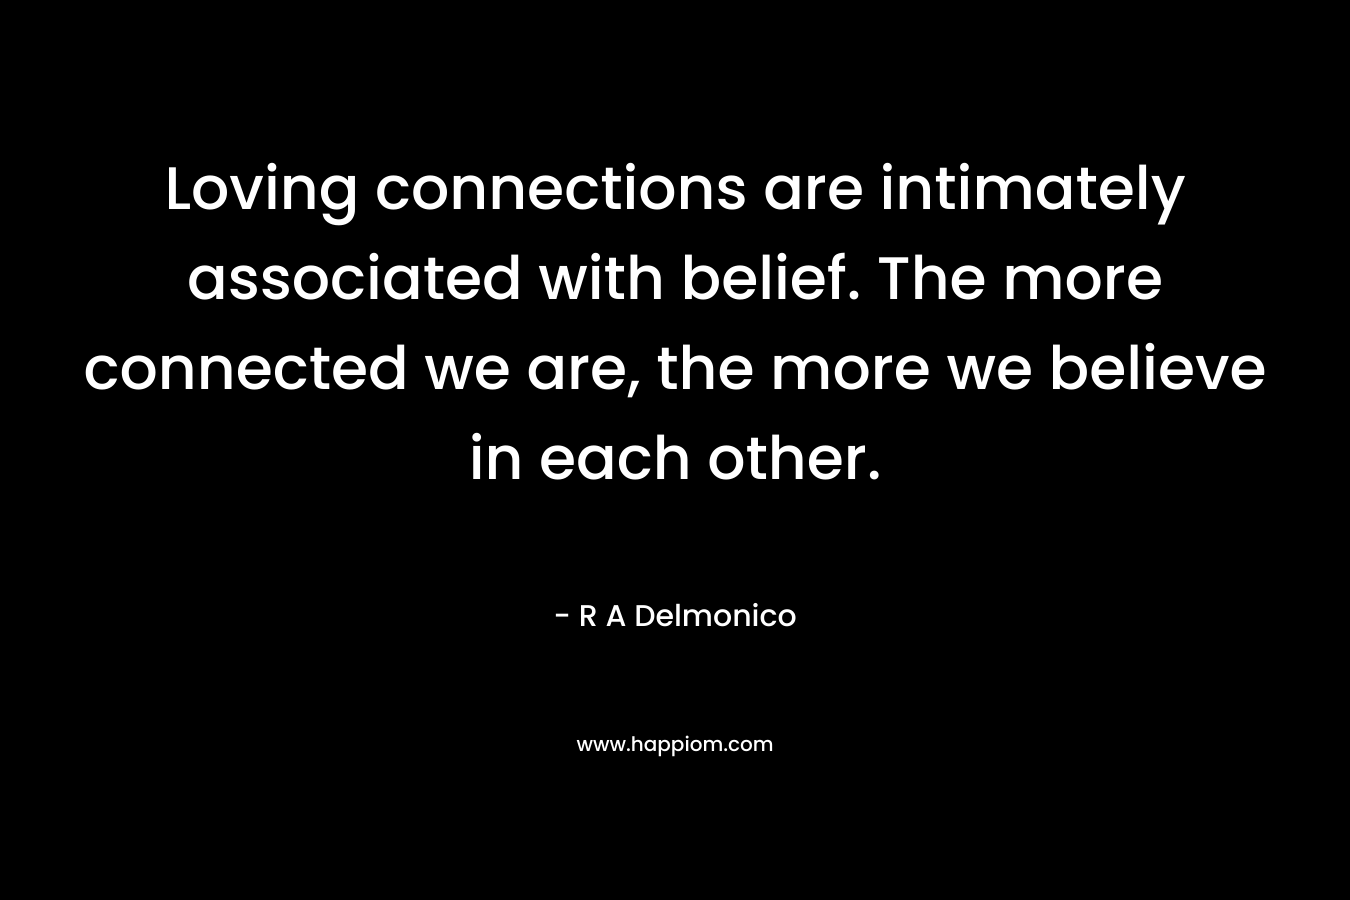 Loving connections are intimately associated with belief. The more connected we are, the more we believe in each other.